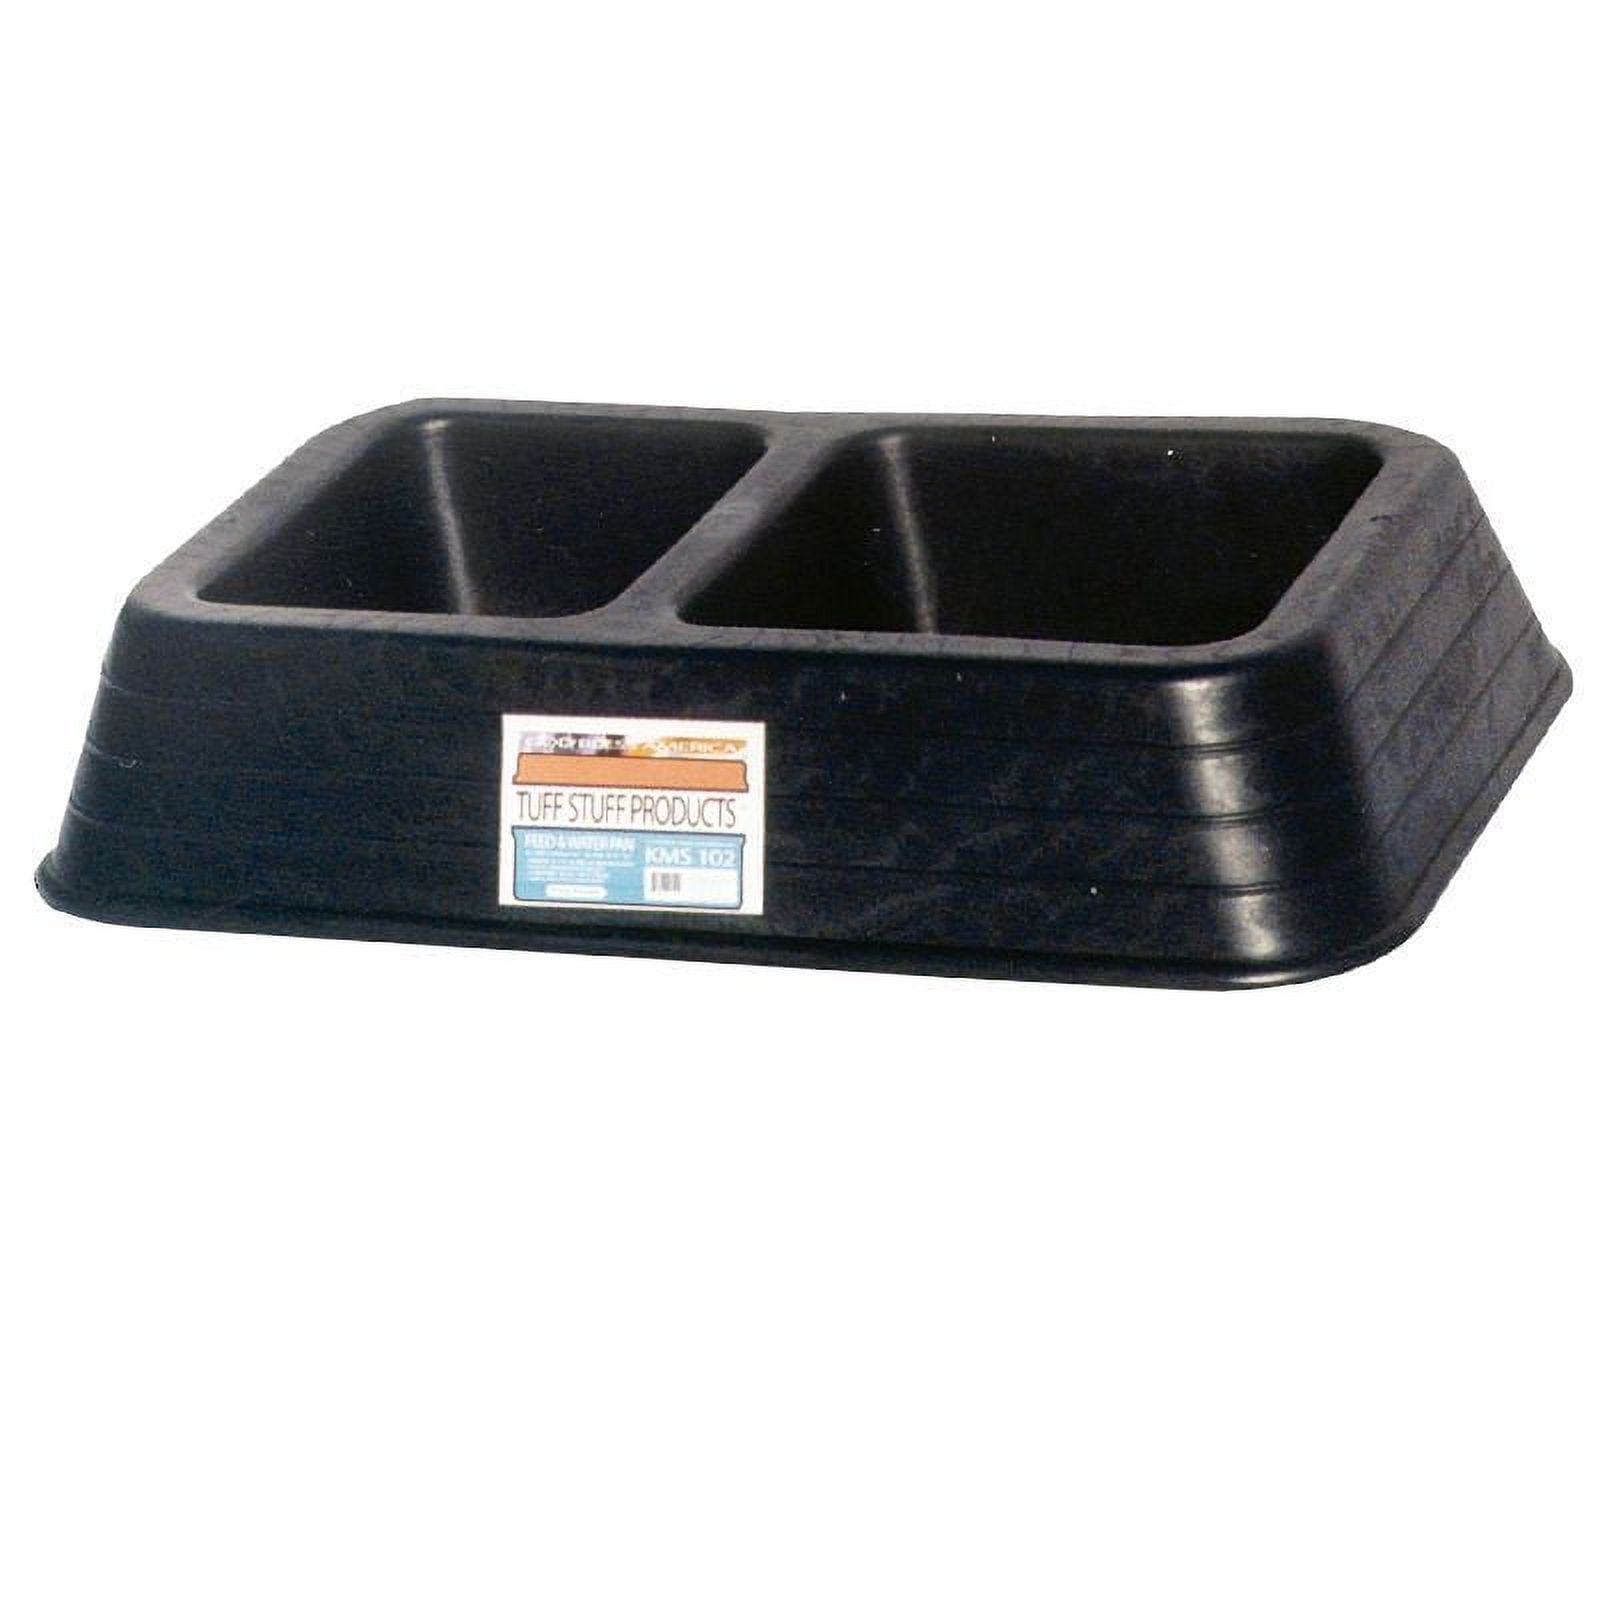 Picture of Tuff Stuff Products DBCKMS102 3 qt Durvet Double Dish